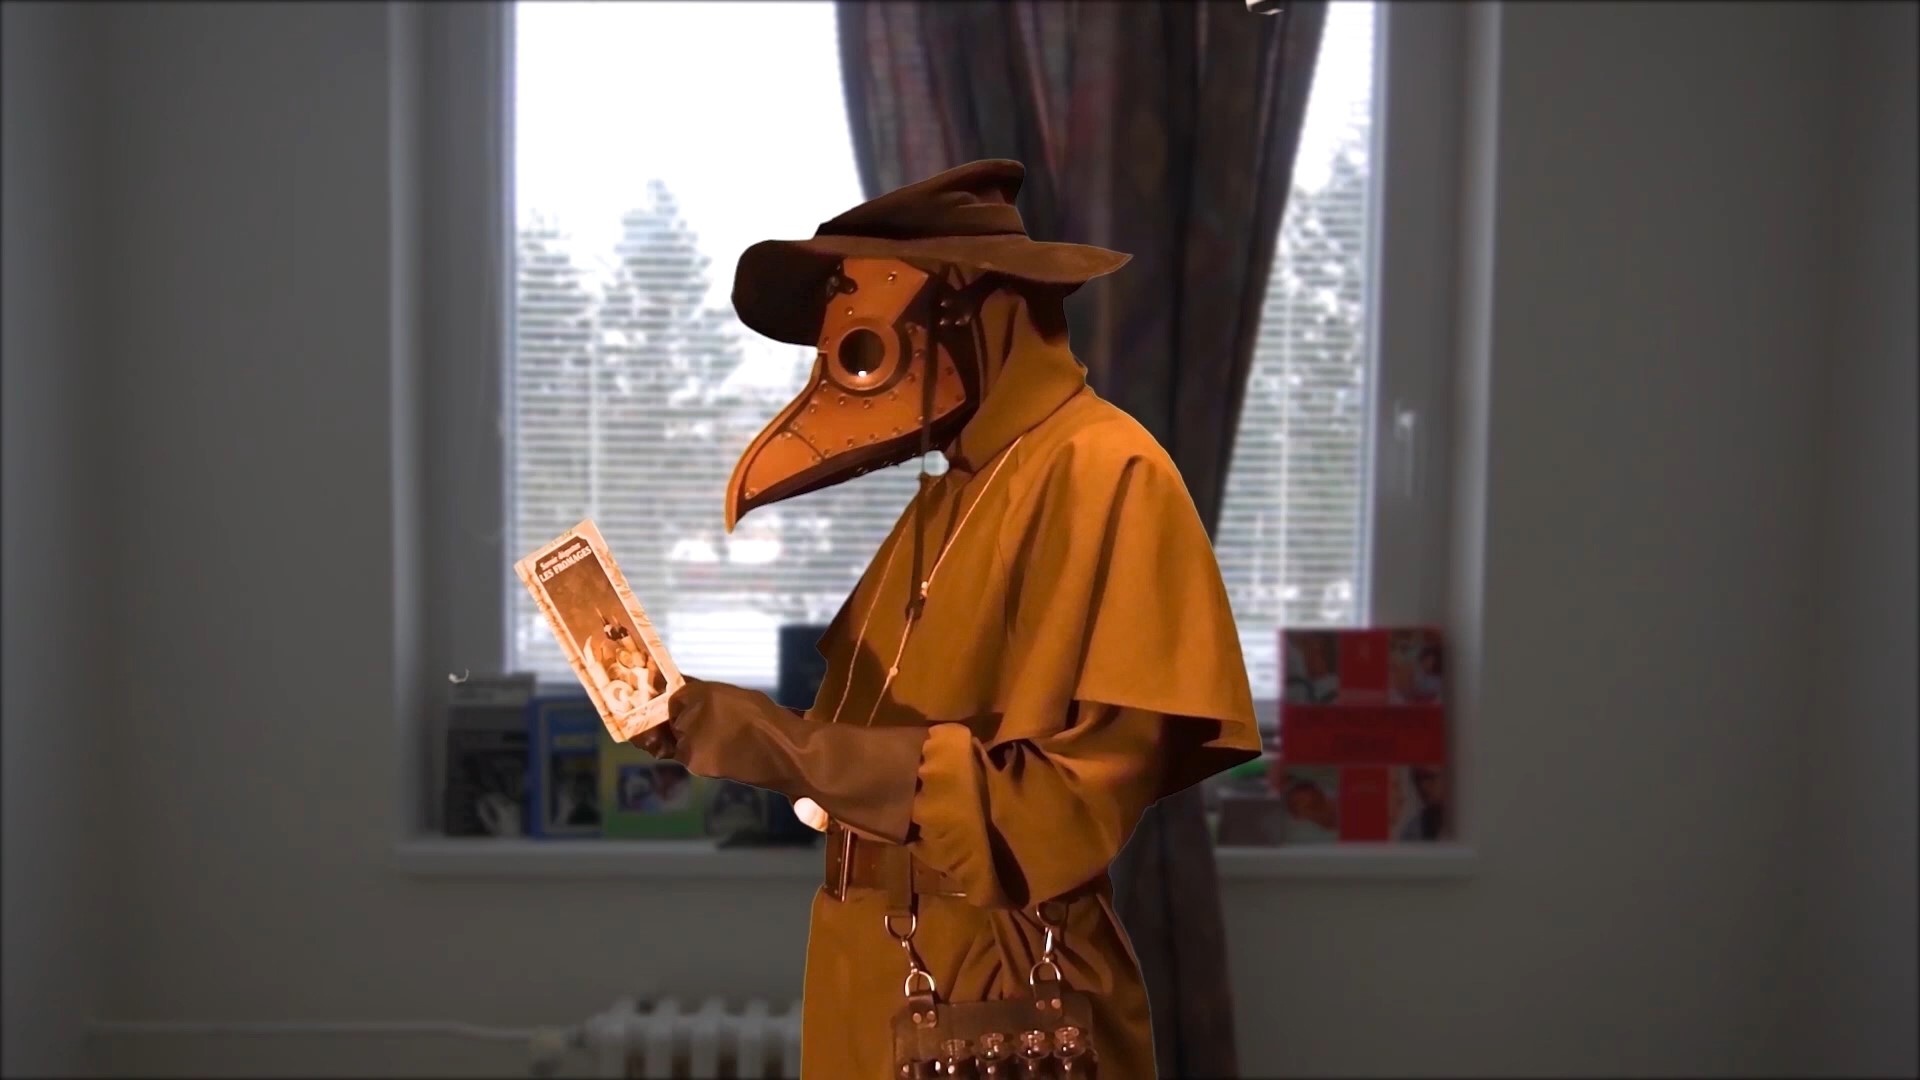 Plague Doctor Goodslof in the movie Major Drone and plague doctor - My, Cosplay, Actors and actresses, The photo, Mask, Major Thunder, Major Thunder: Plague Doctor, Cosplayers, Plague Doctor, Frame, Movies, Russian cinema, Russia, Plague, Parody, Costume, Video, Longpost